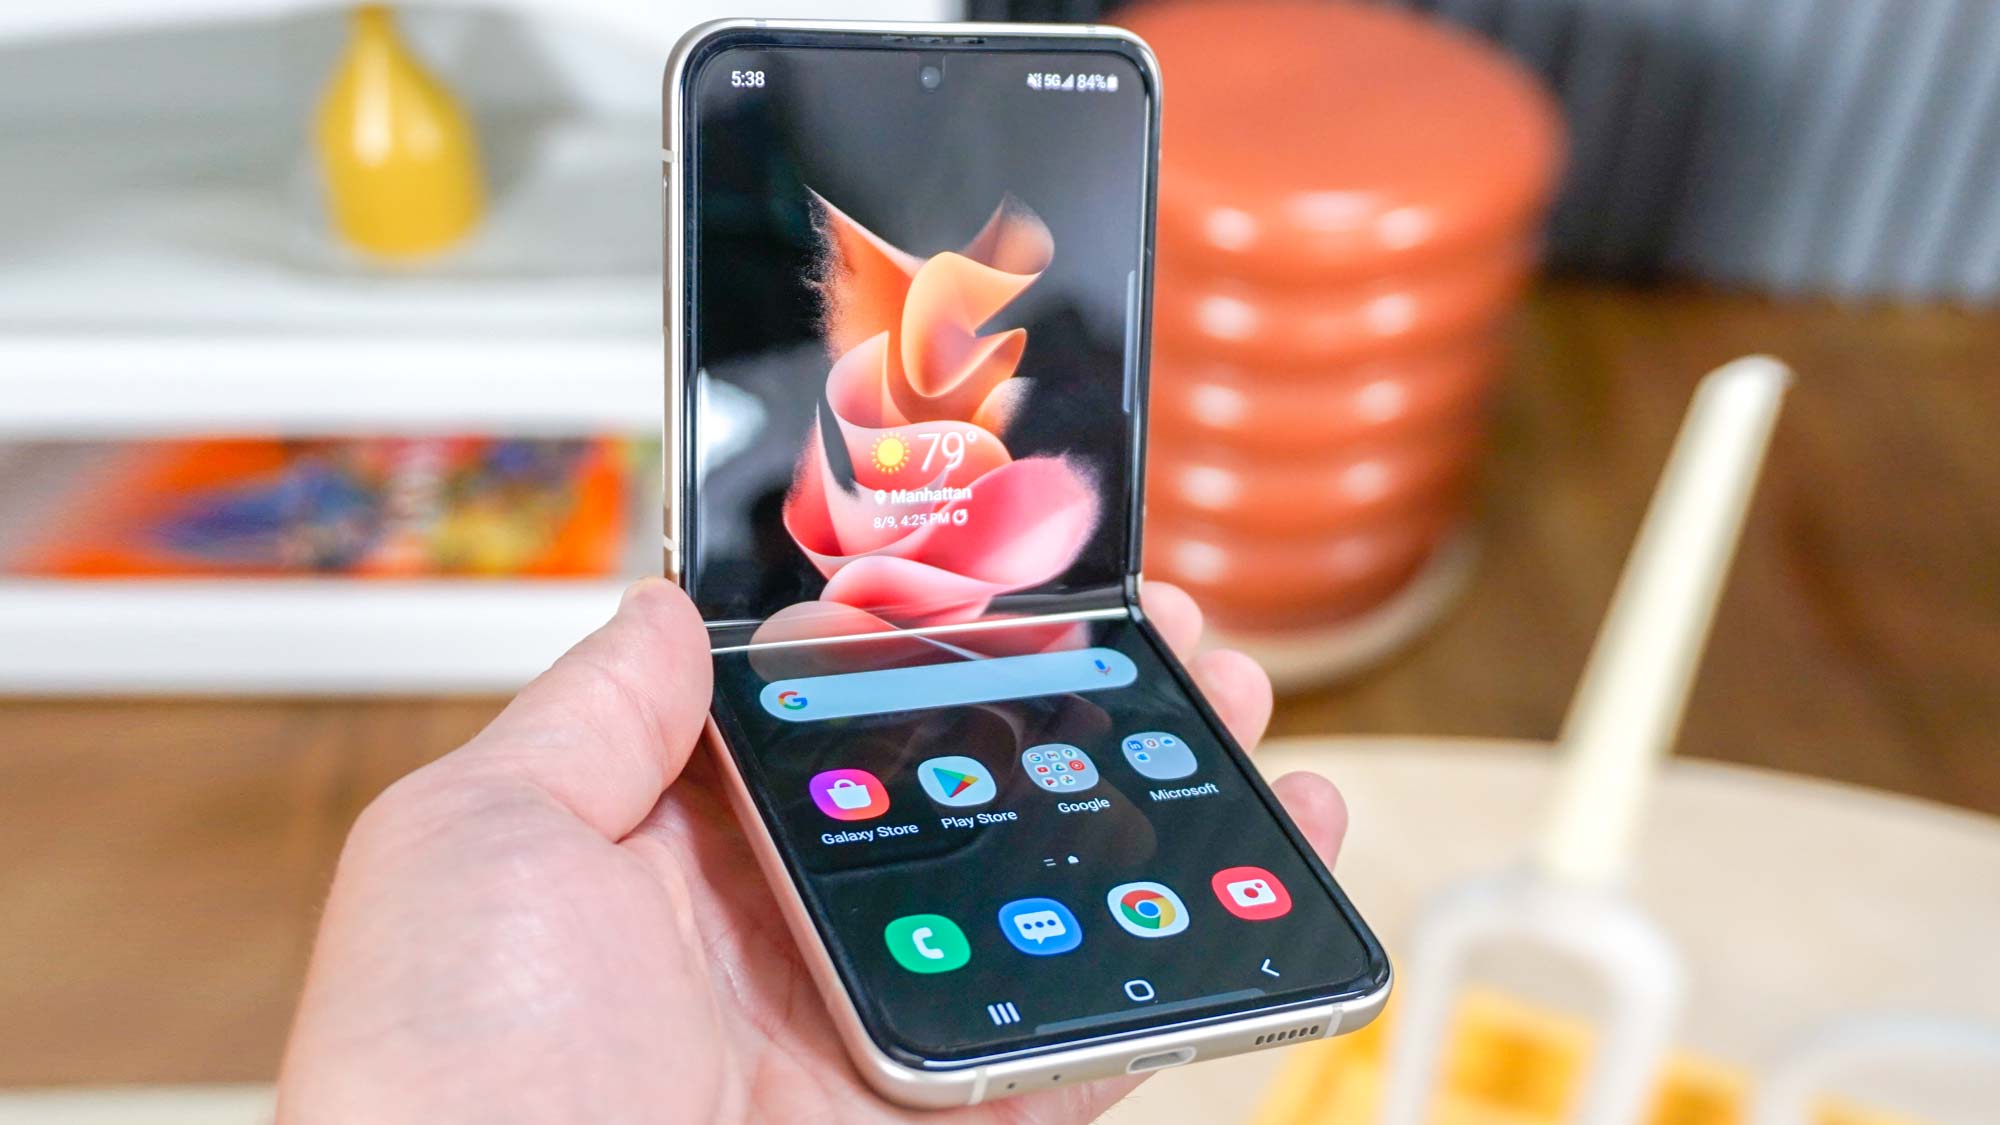 Samsung Galaxy Z Flip 3 review: The first foldable phone under $1,000 | Tom's Guide